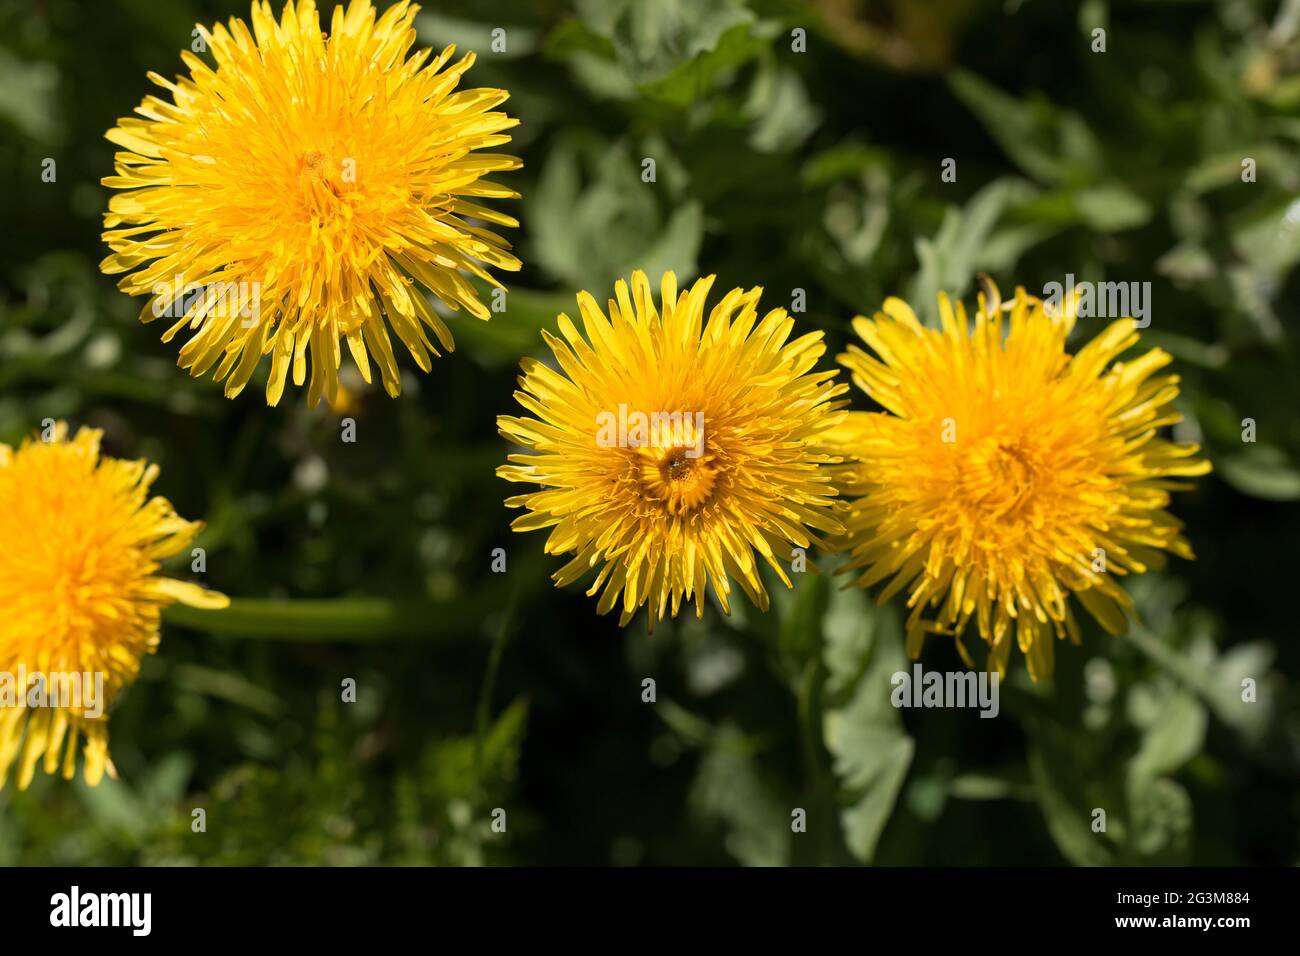 A group of yellow dandelion flowers, Taraxacum officinale, lions tooth or clockflower, blooming in springtime, close-up view from above Stock Photo